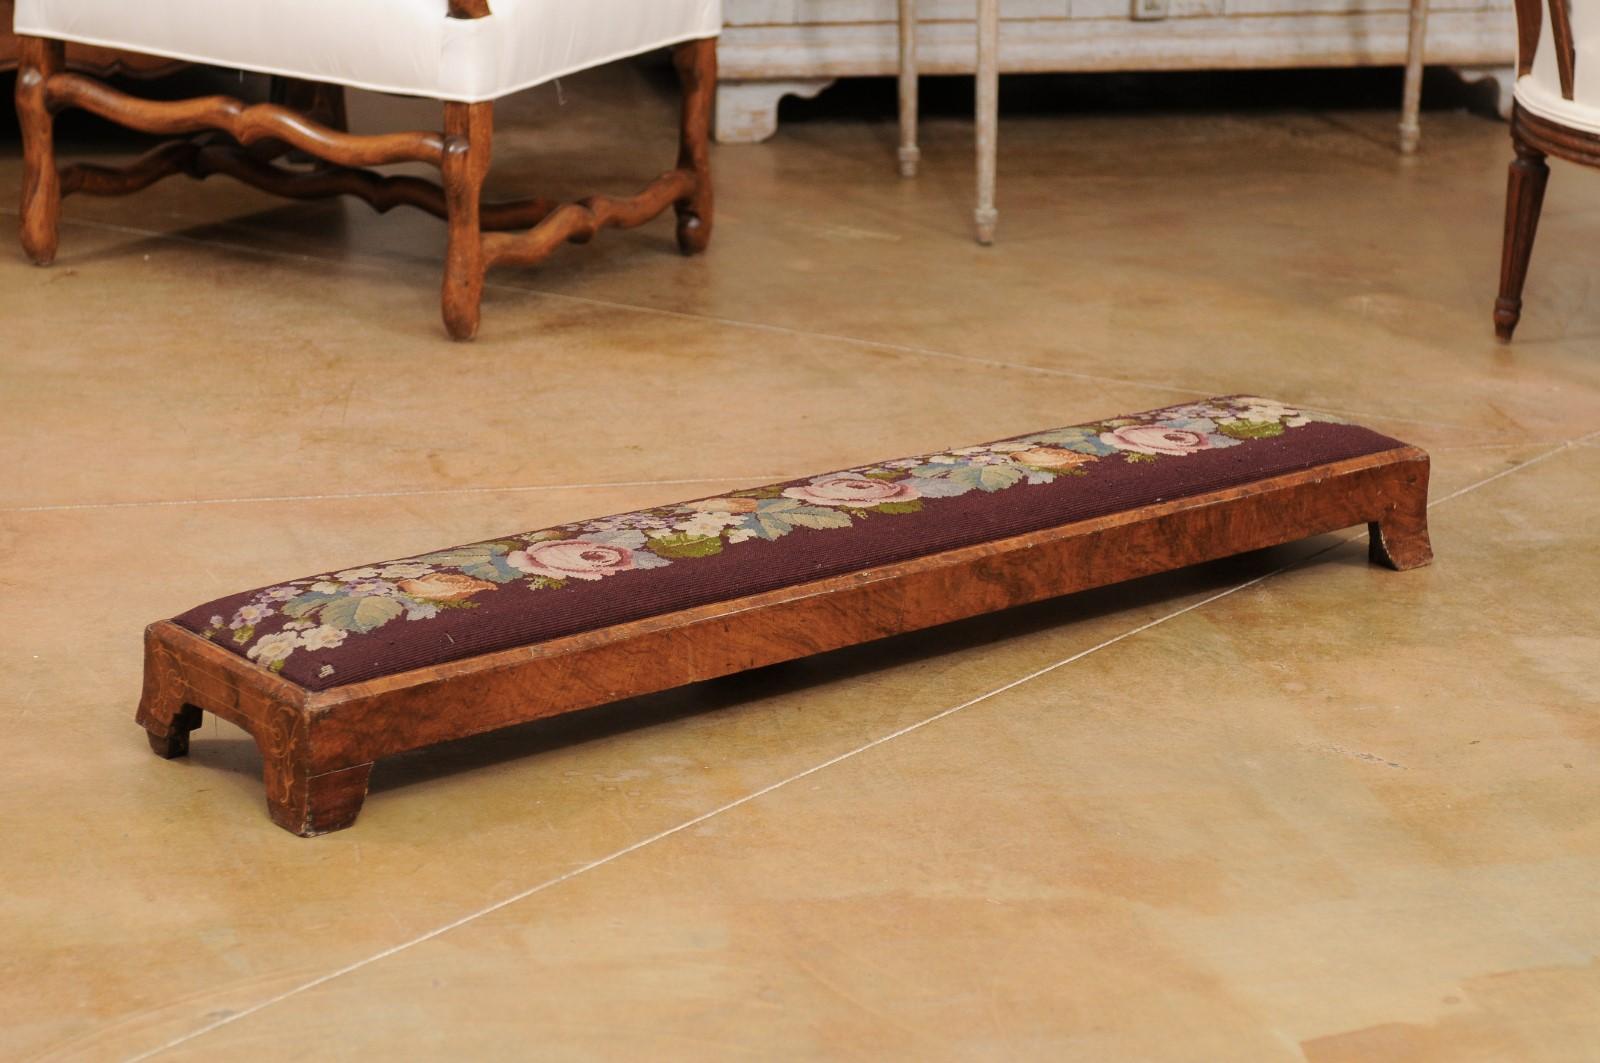 A French Napoléon III period long needlepoint footstool from the mid 19th century, with floral décor and splayed bracket feet. Created in France during the reign of Emperor Napoléon III, this footstool features a long narrow top covered with a